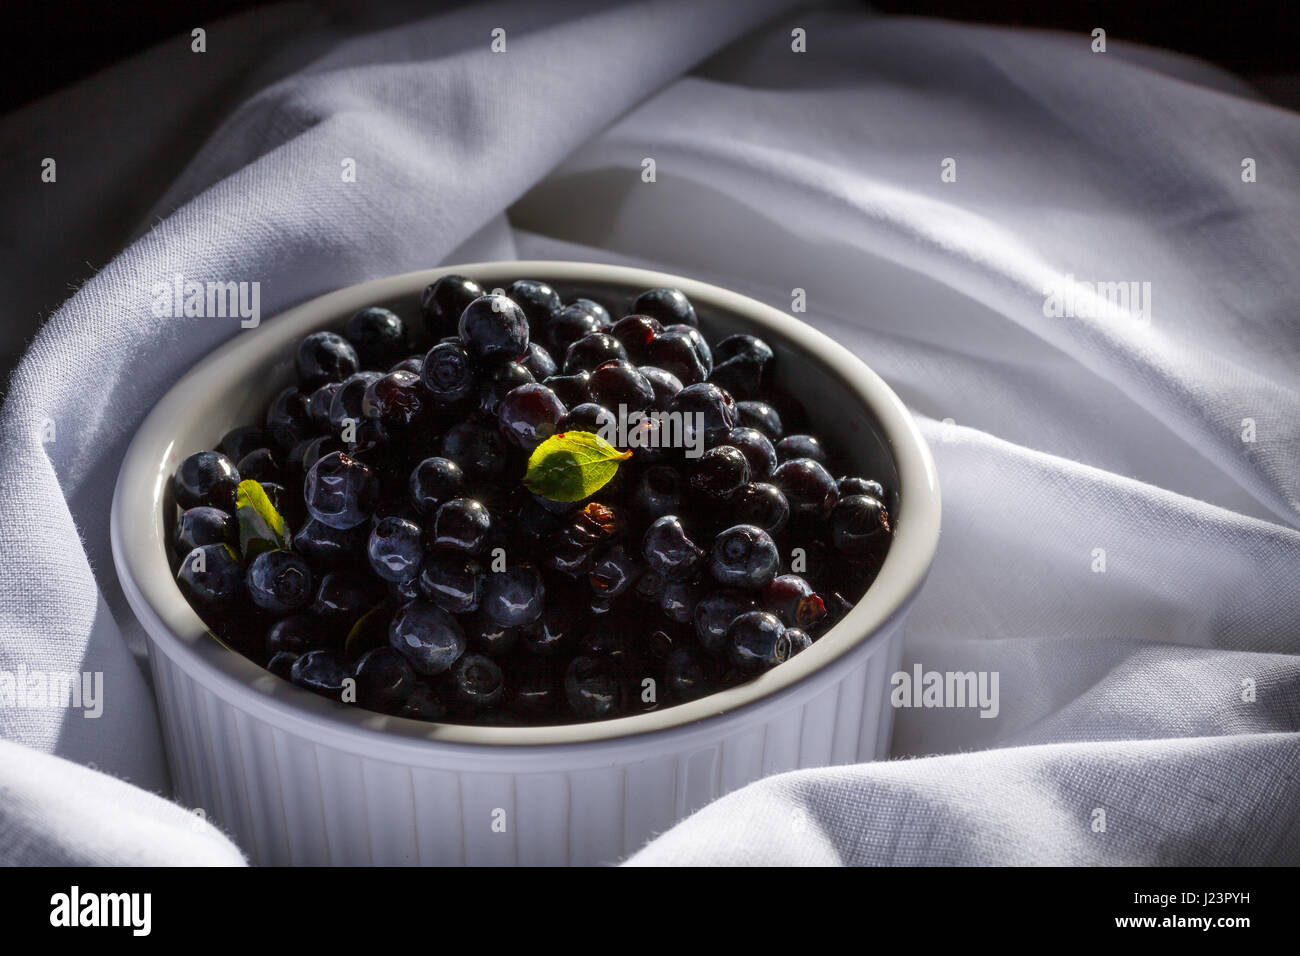 Pile blueberries in white ceramic bowl stay on white organic material. Stock Photo